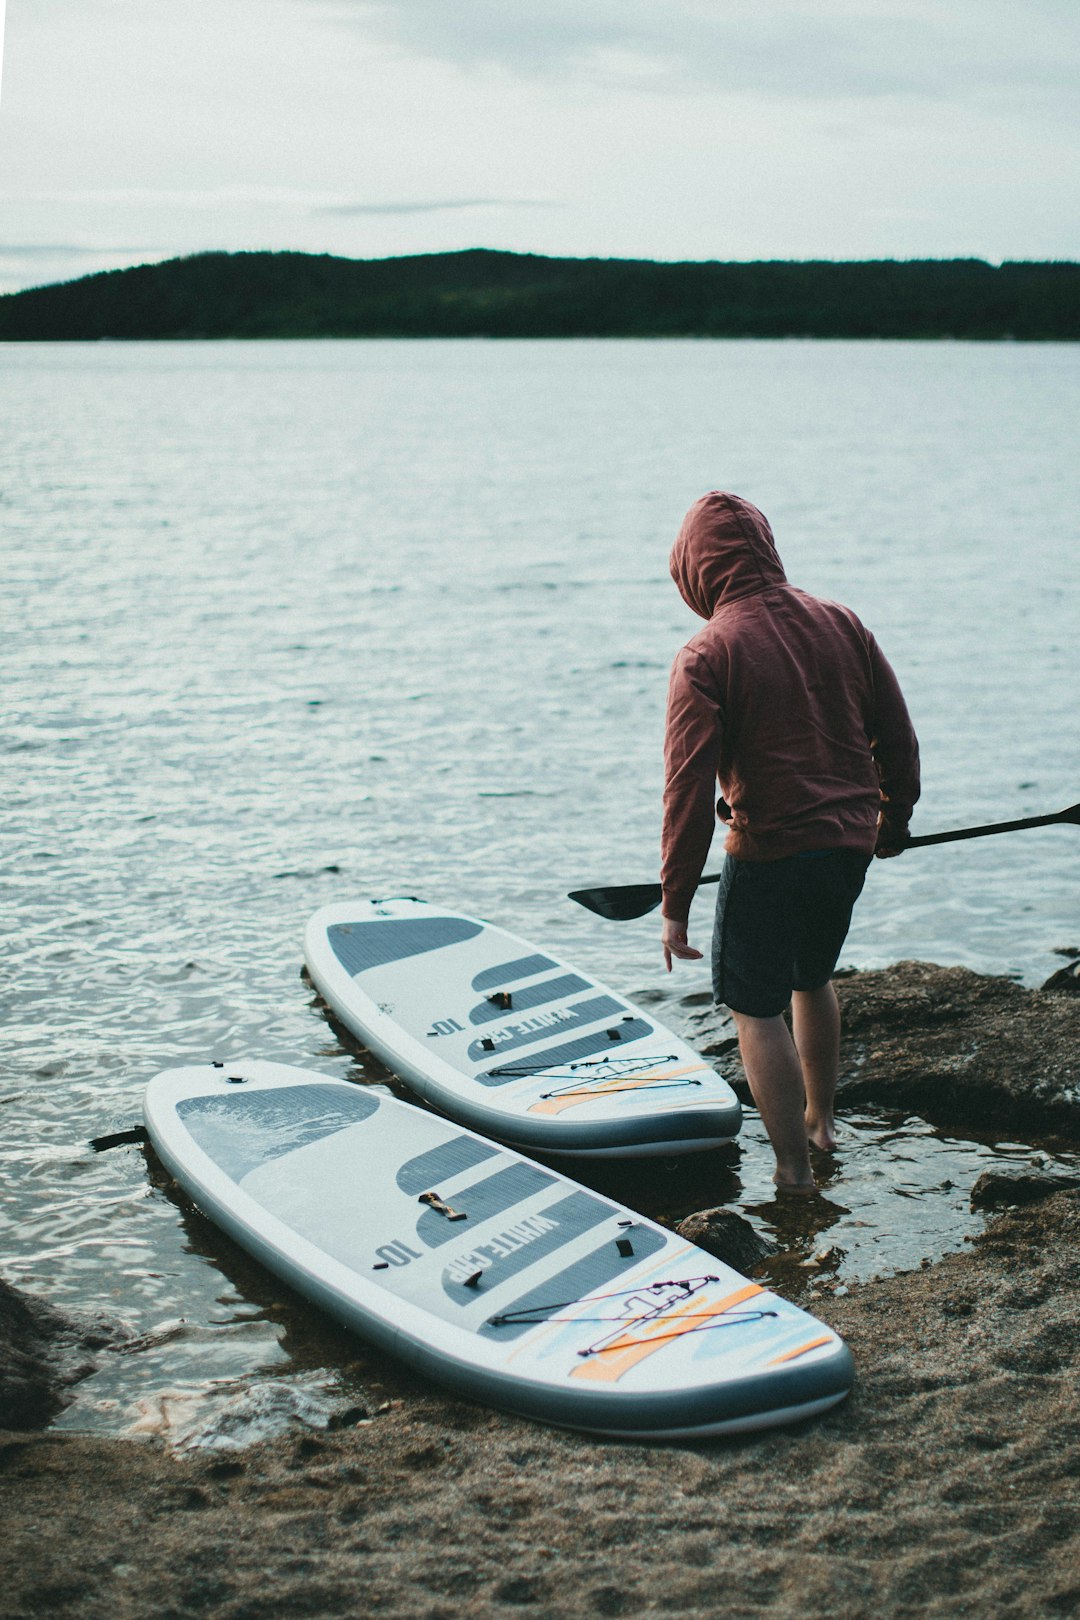 man in red hoodie and black shorts standing on white surfboard on body of water during